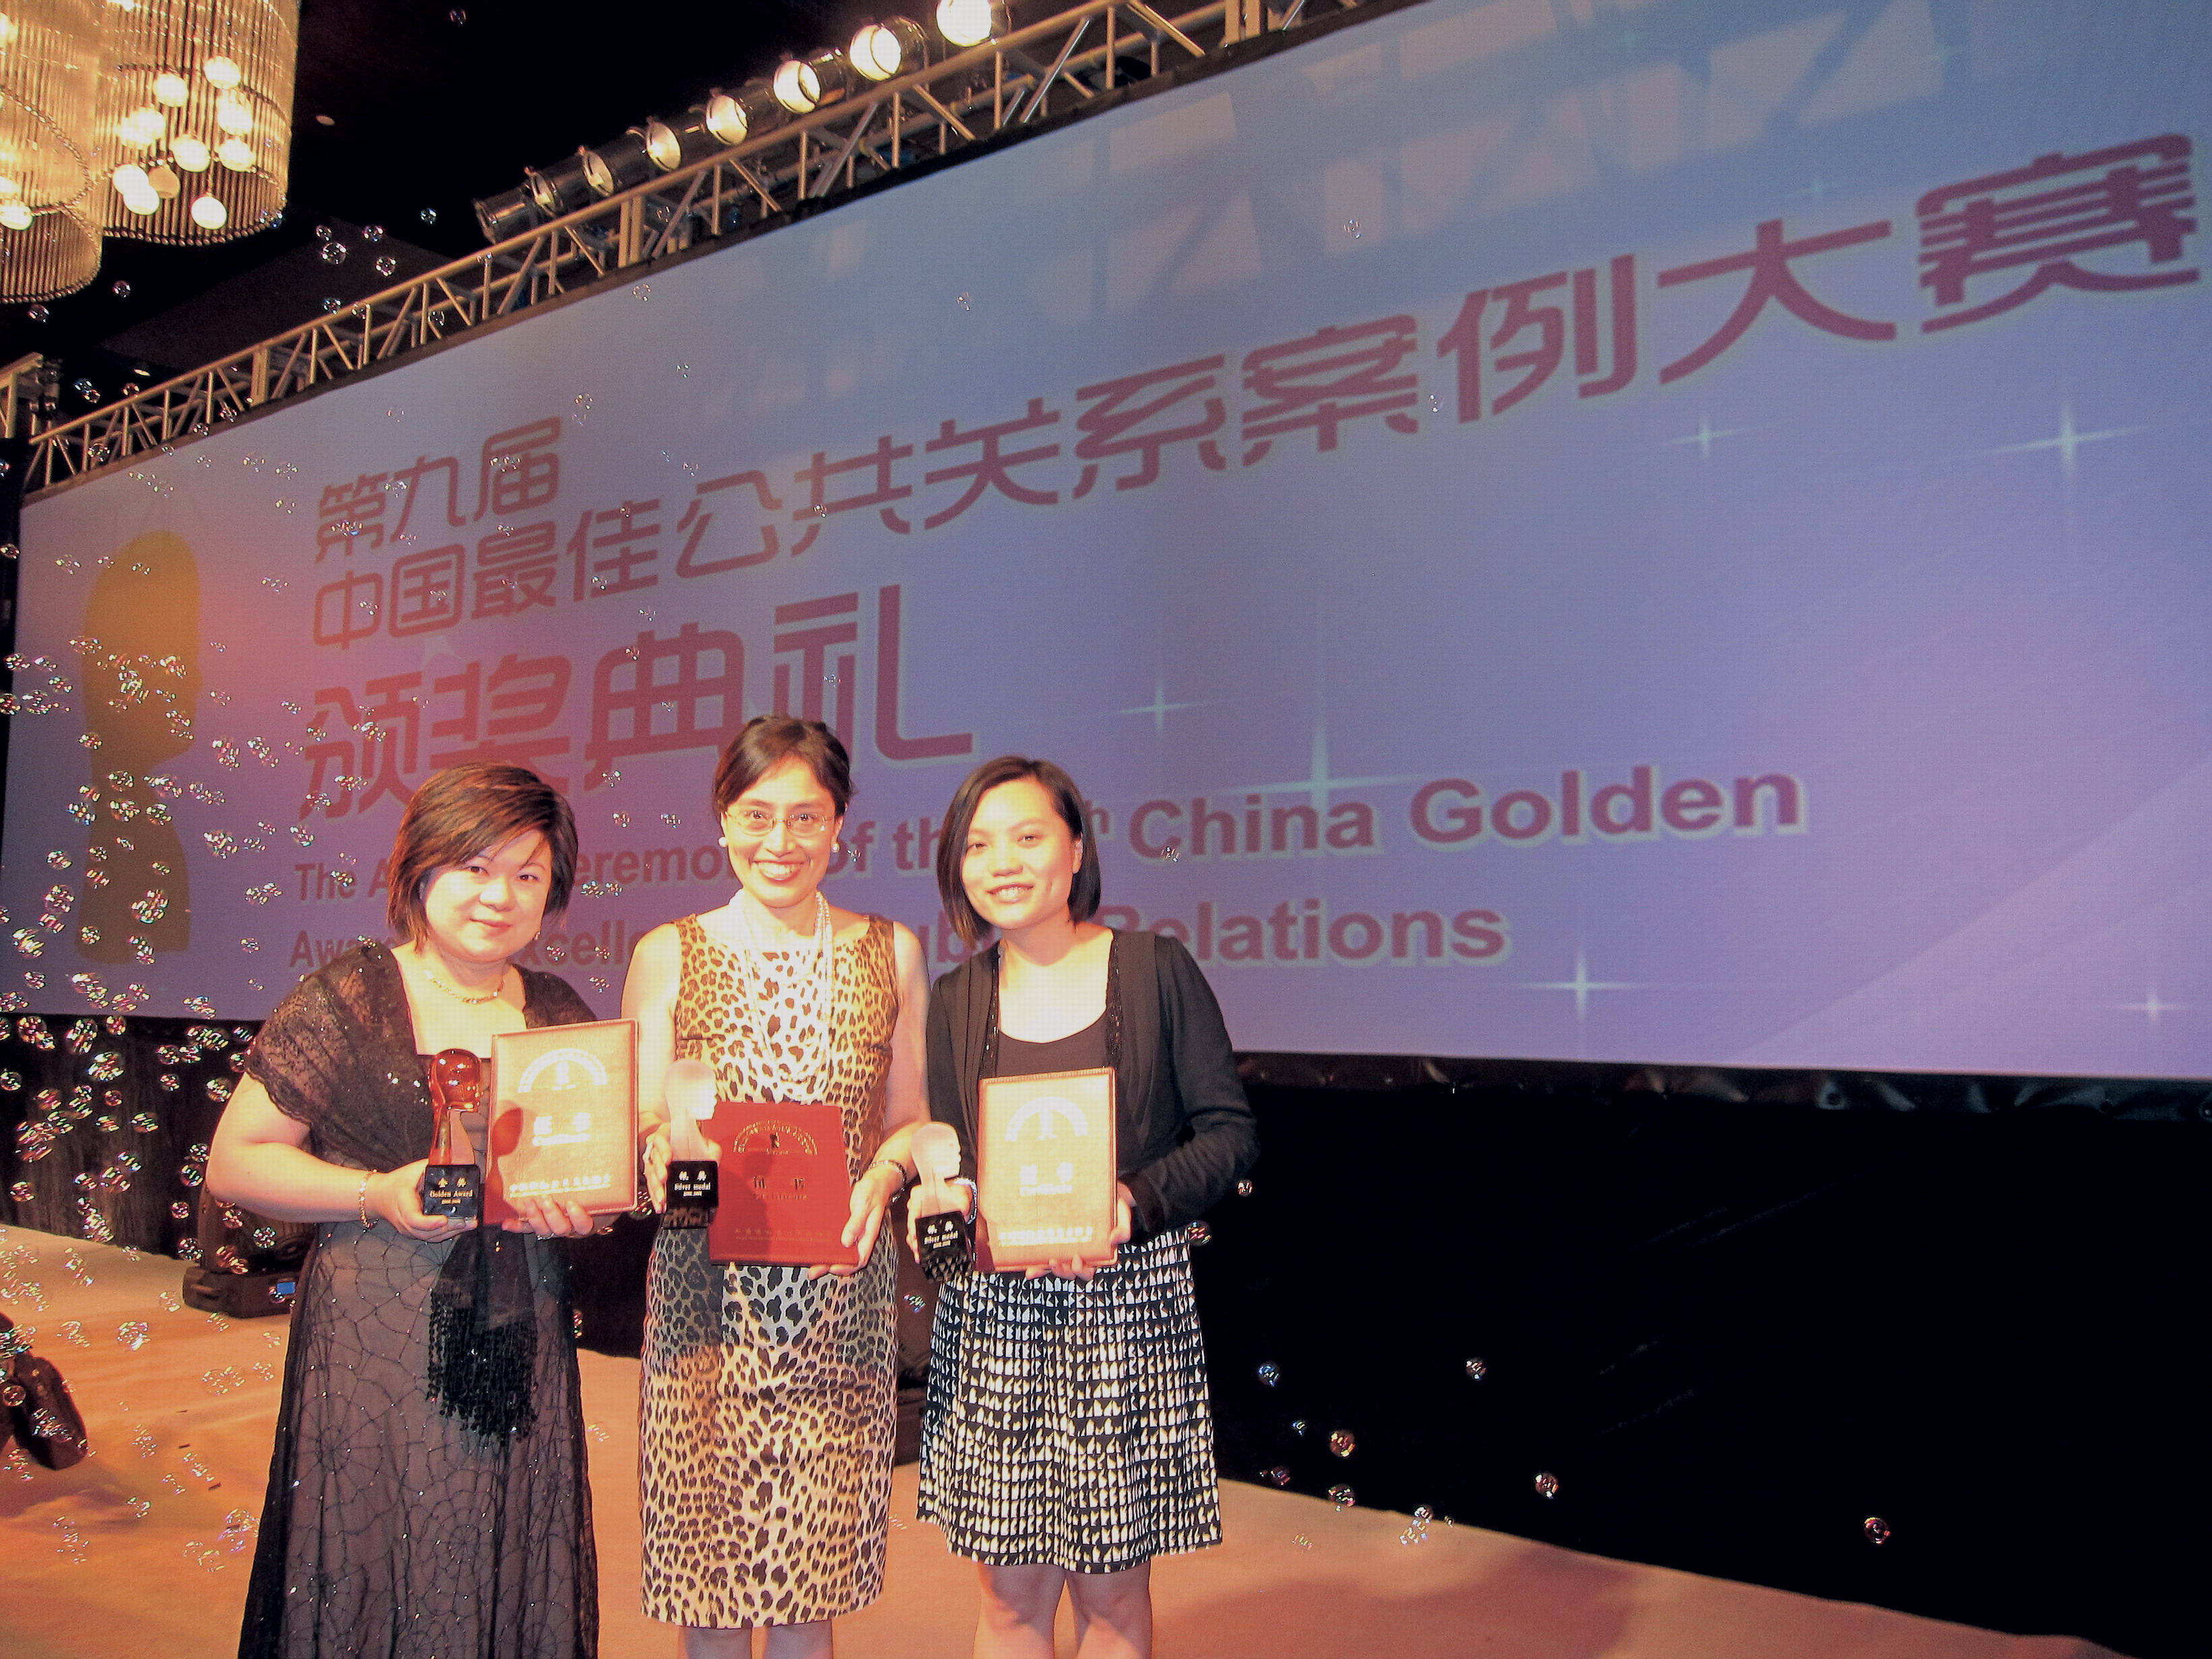 NWS Holdings garnered awards in China Golden Awards for Excellence in Public Relations